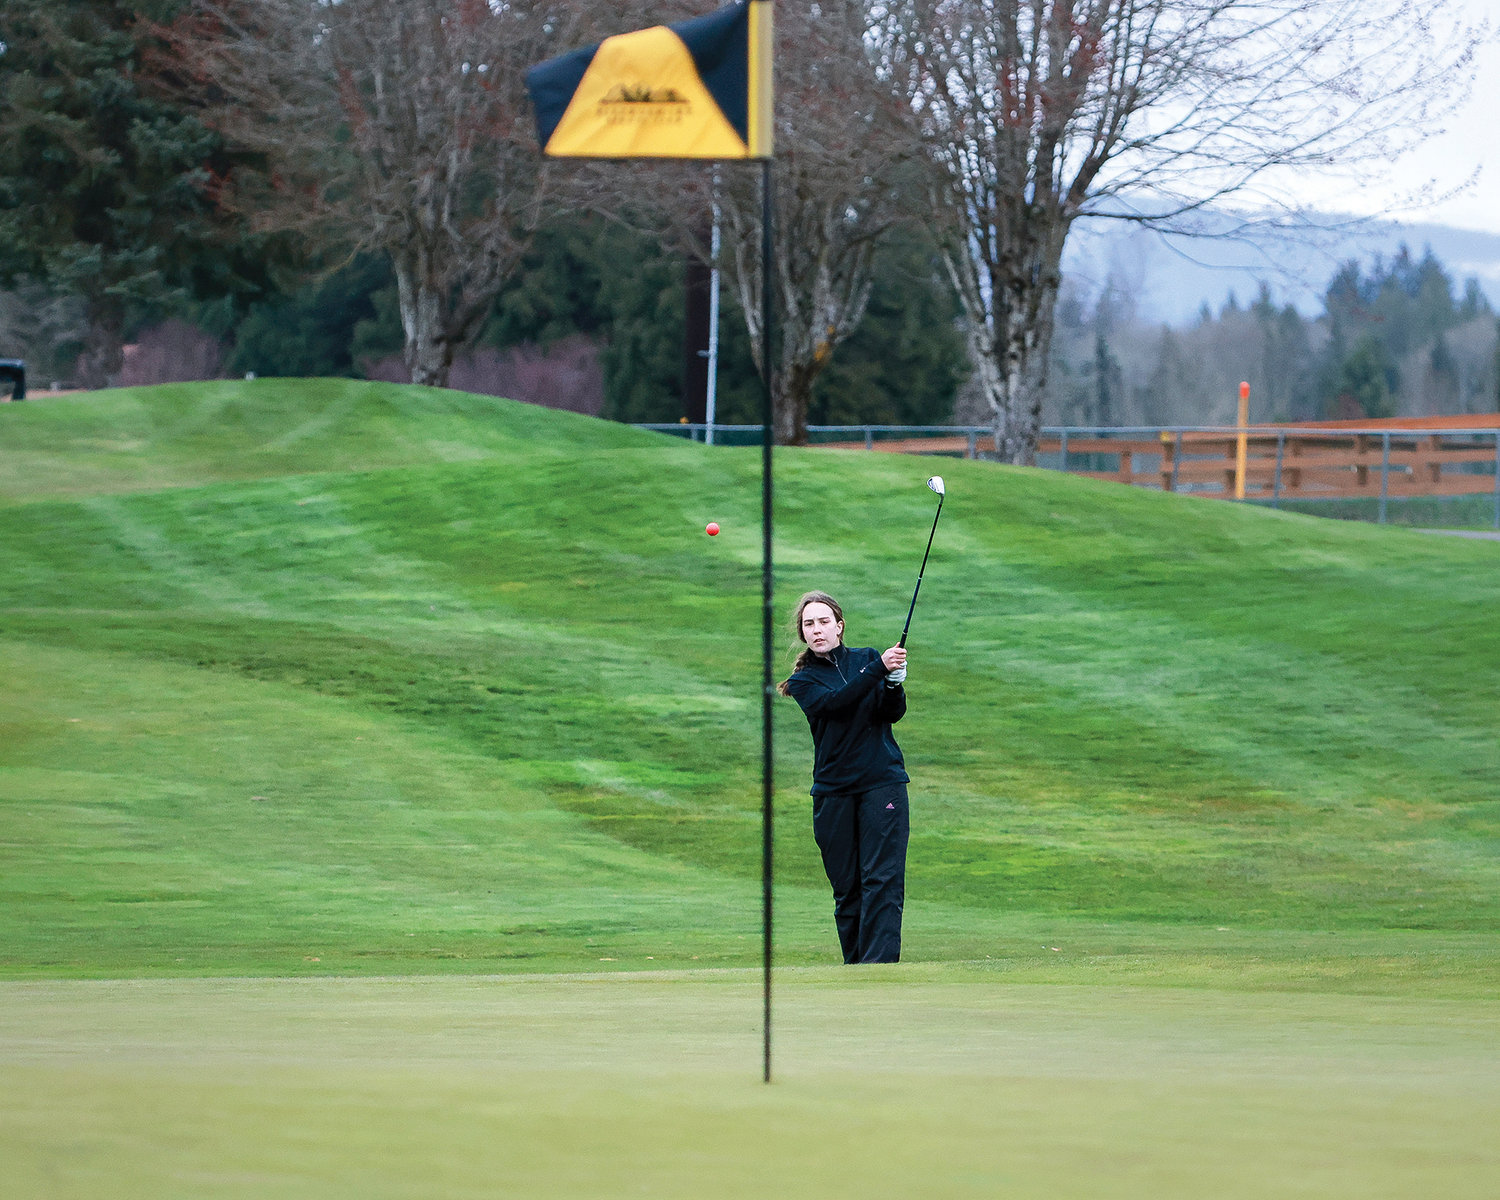 Senior Brooke Allen, from Battle Ground High School, hits a chip shot on hole five during a match against Mountain View on Tuesday, March 28, at Tri-Mountain Golf Course in Ridgefield.